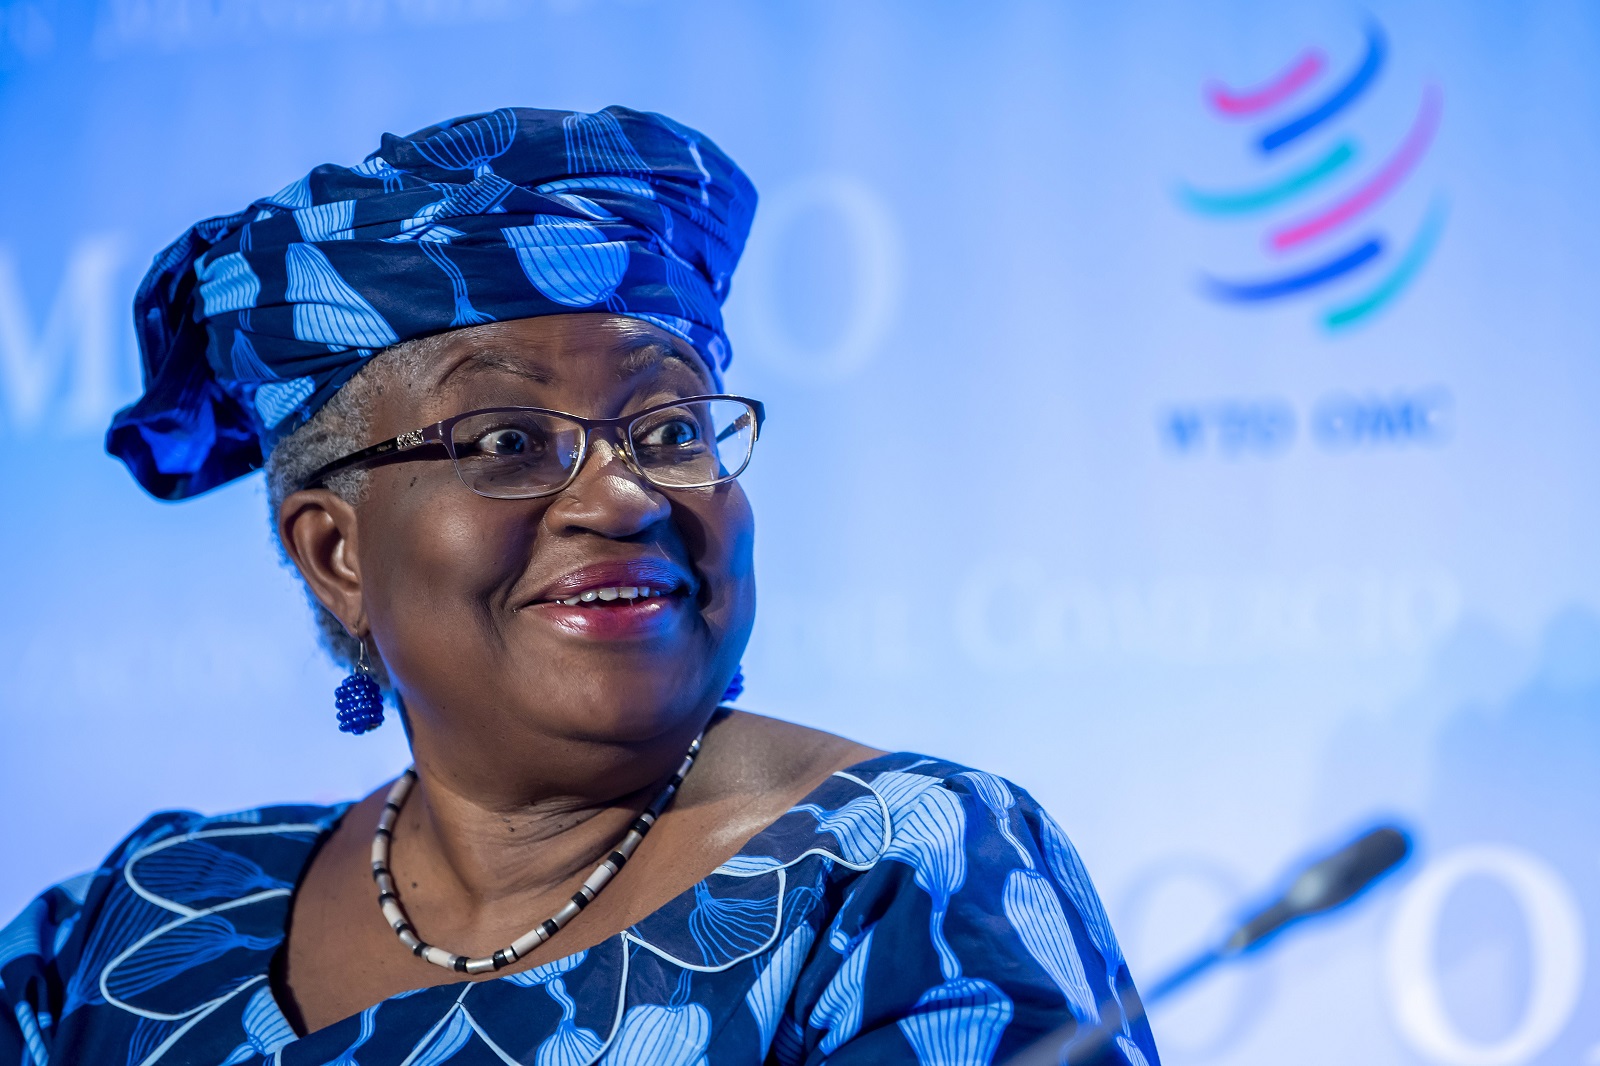 epa09014563 (FILE) Ngozi Okonjo-Iweala from Nigeria attends the press conferences of candidates for the WTO Director-General selection process, at the headquarters of the World Trade Organization (WTO), in Geneva, Switzerland, 15 July 2020 (reissued 15 February 2021). Ngozi Okonjo-Iweala became WTO Director General succeeding Roberto Azevedo, the organisation announced on 15 February 2021.  EPA/MARTIAL TREZZINI